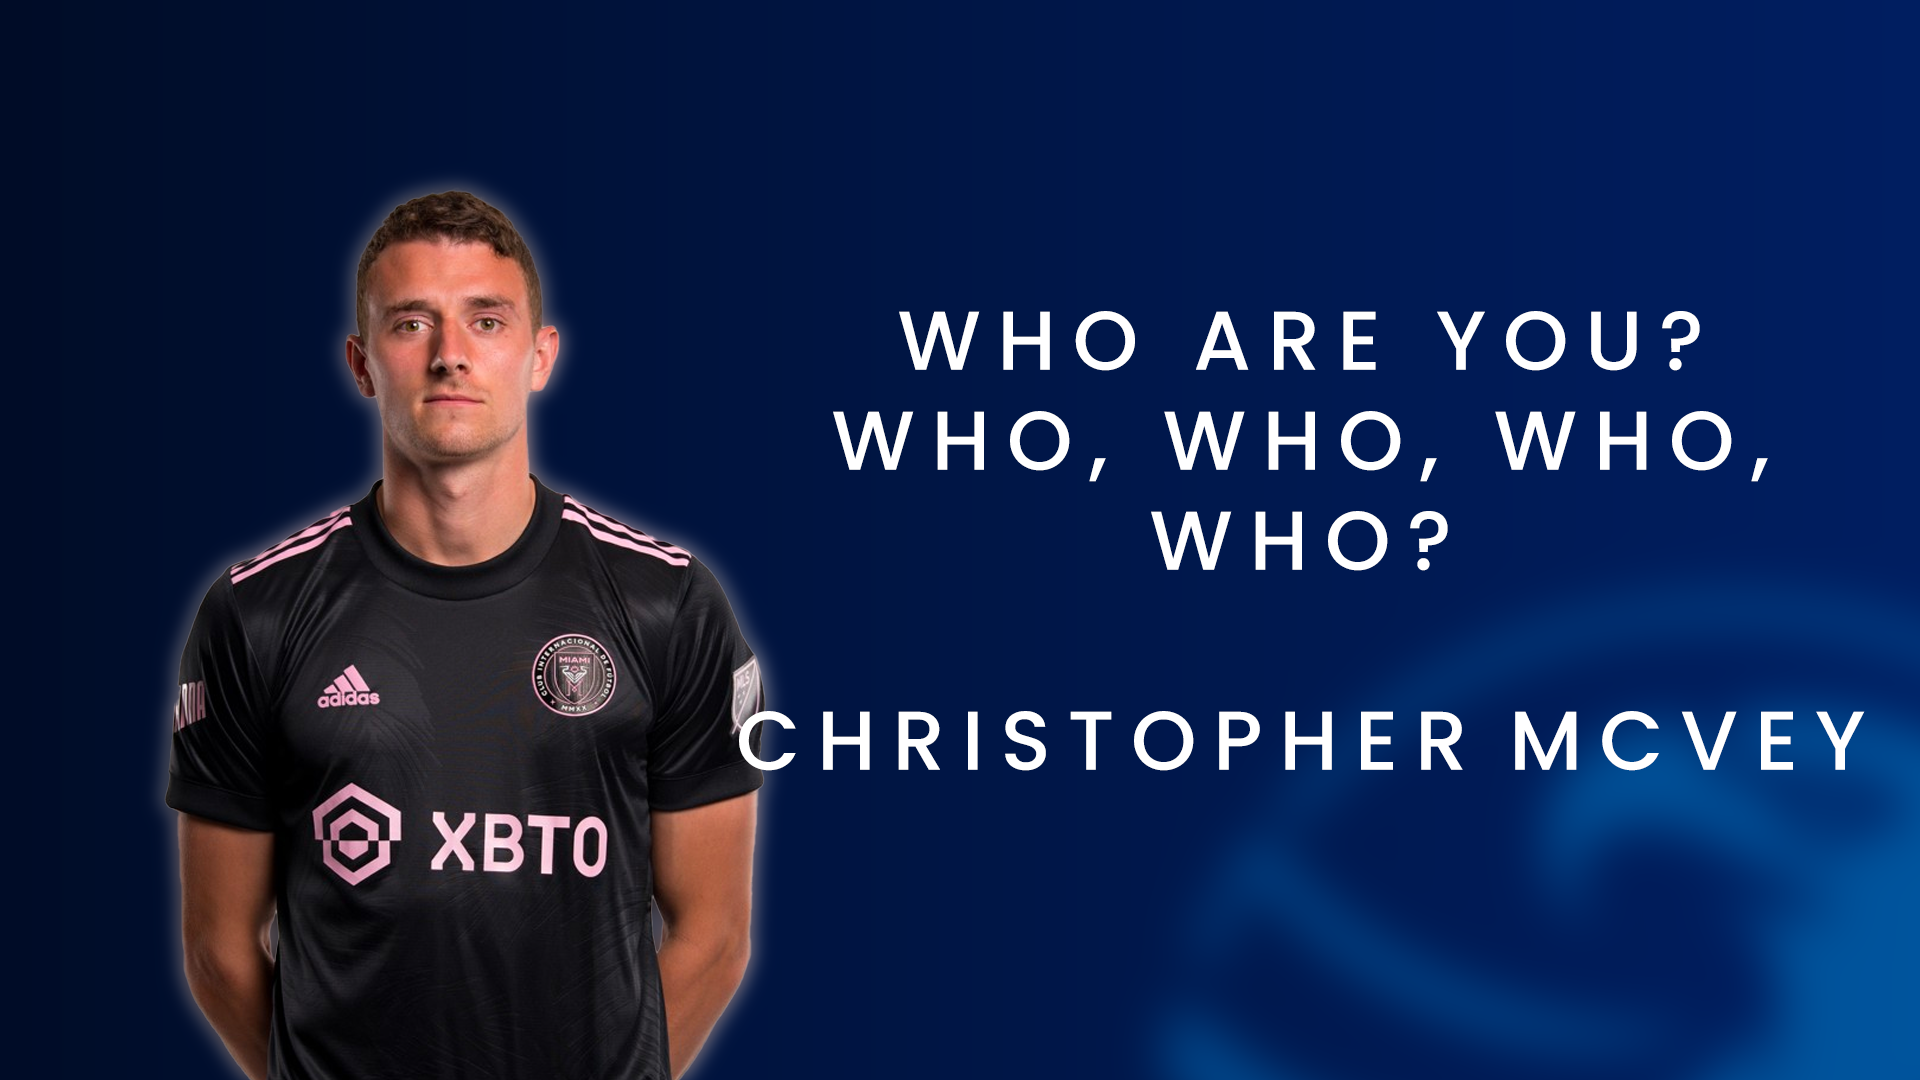 Who Are You? Who, who, who, who? Christopher McVey